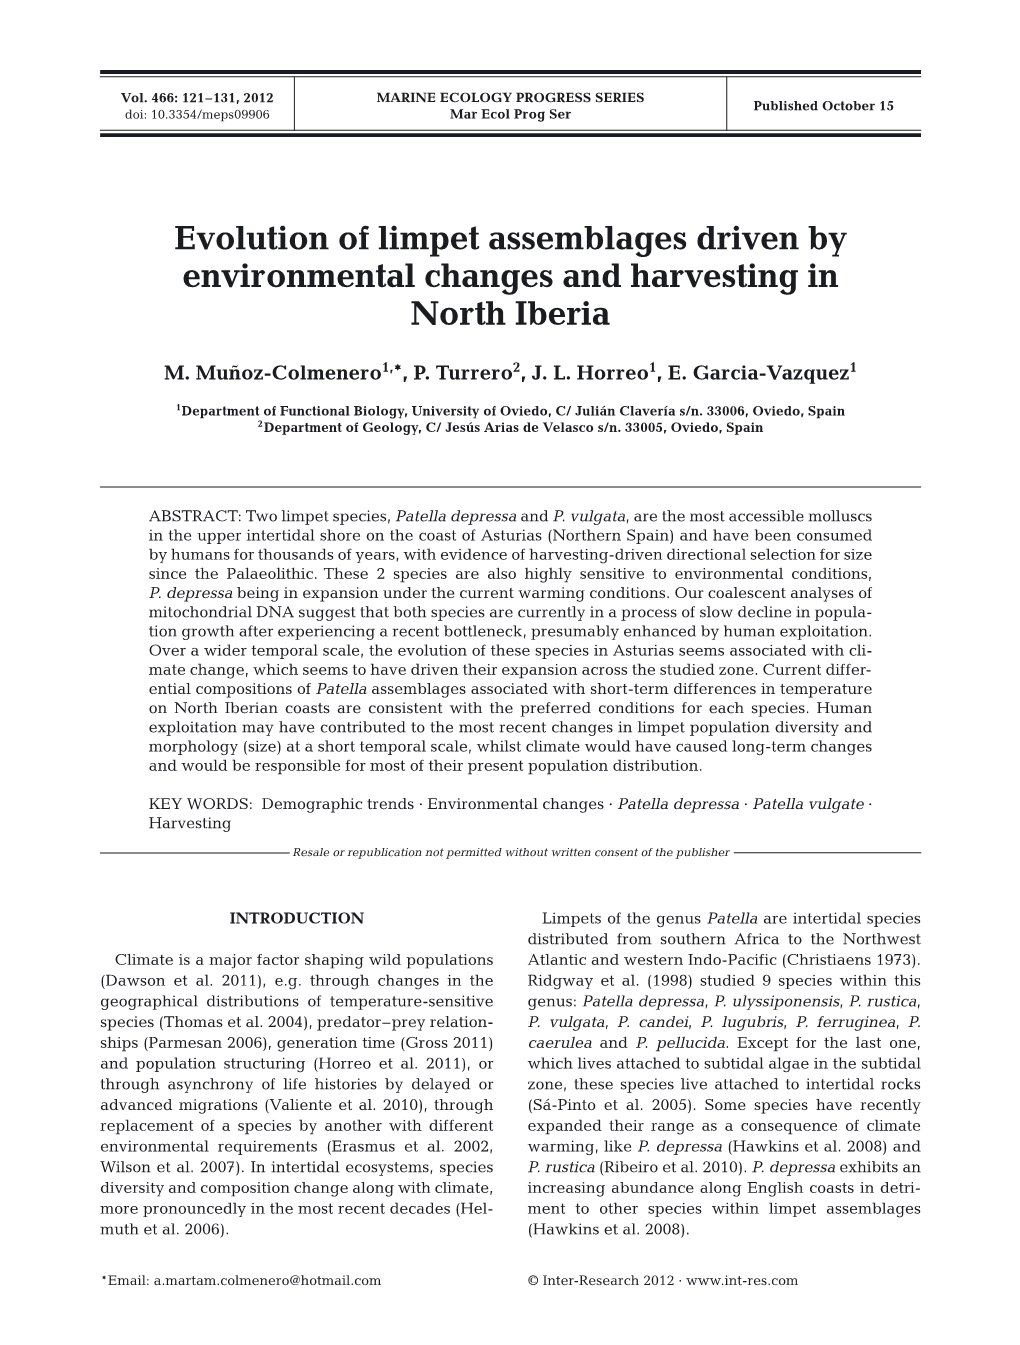 Evolution of Limpet Assemblages Driven by Environmental Changes and Harvesting in North Iberia